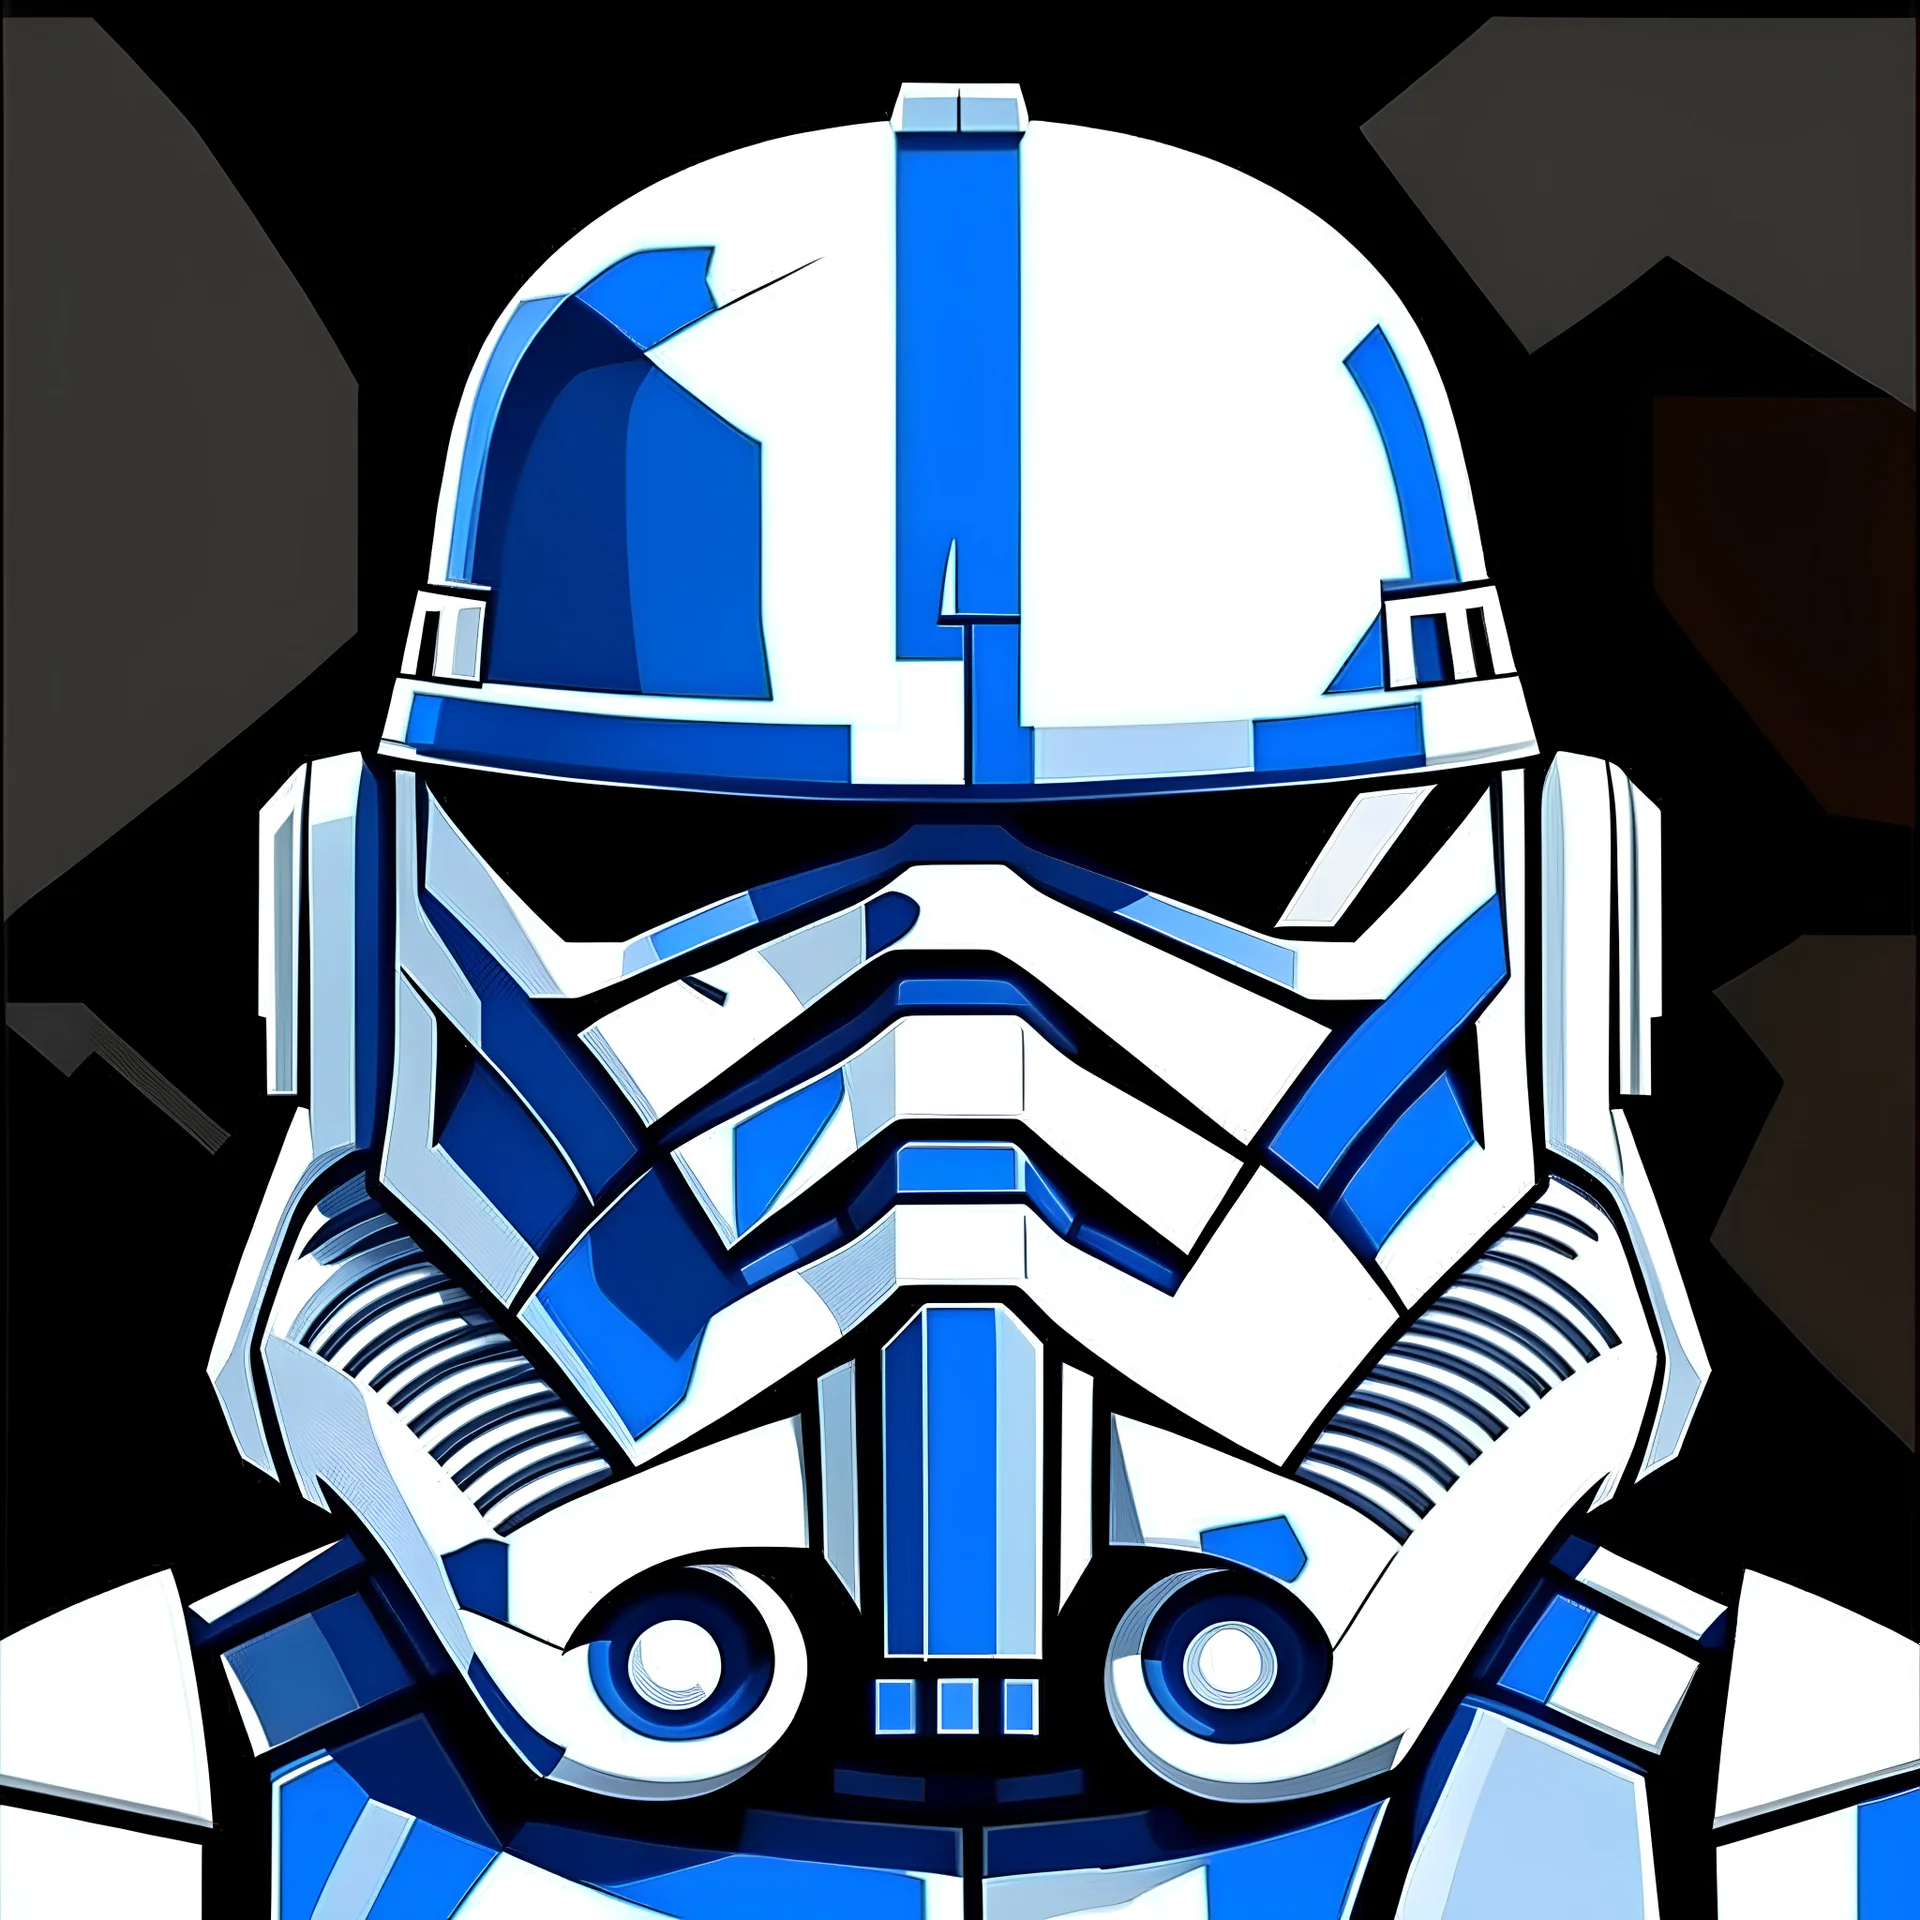 Craft an image of a Star Wars Clone Wars Arc Trooper in the style of abstract art, with a front-facing 2D design. It has Republic logo on the helmet. The helmet should be geometric, stark, and utilize black, white and a touch of blue. It should be placed against a plain white background, filling the majority of the square frame, and stripped of any detail that does not contribute to its minimalist aesthetic.